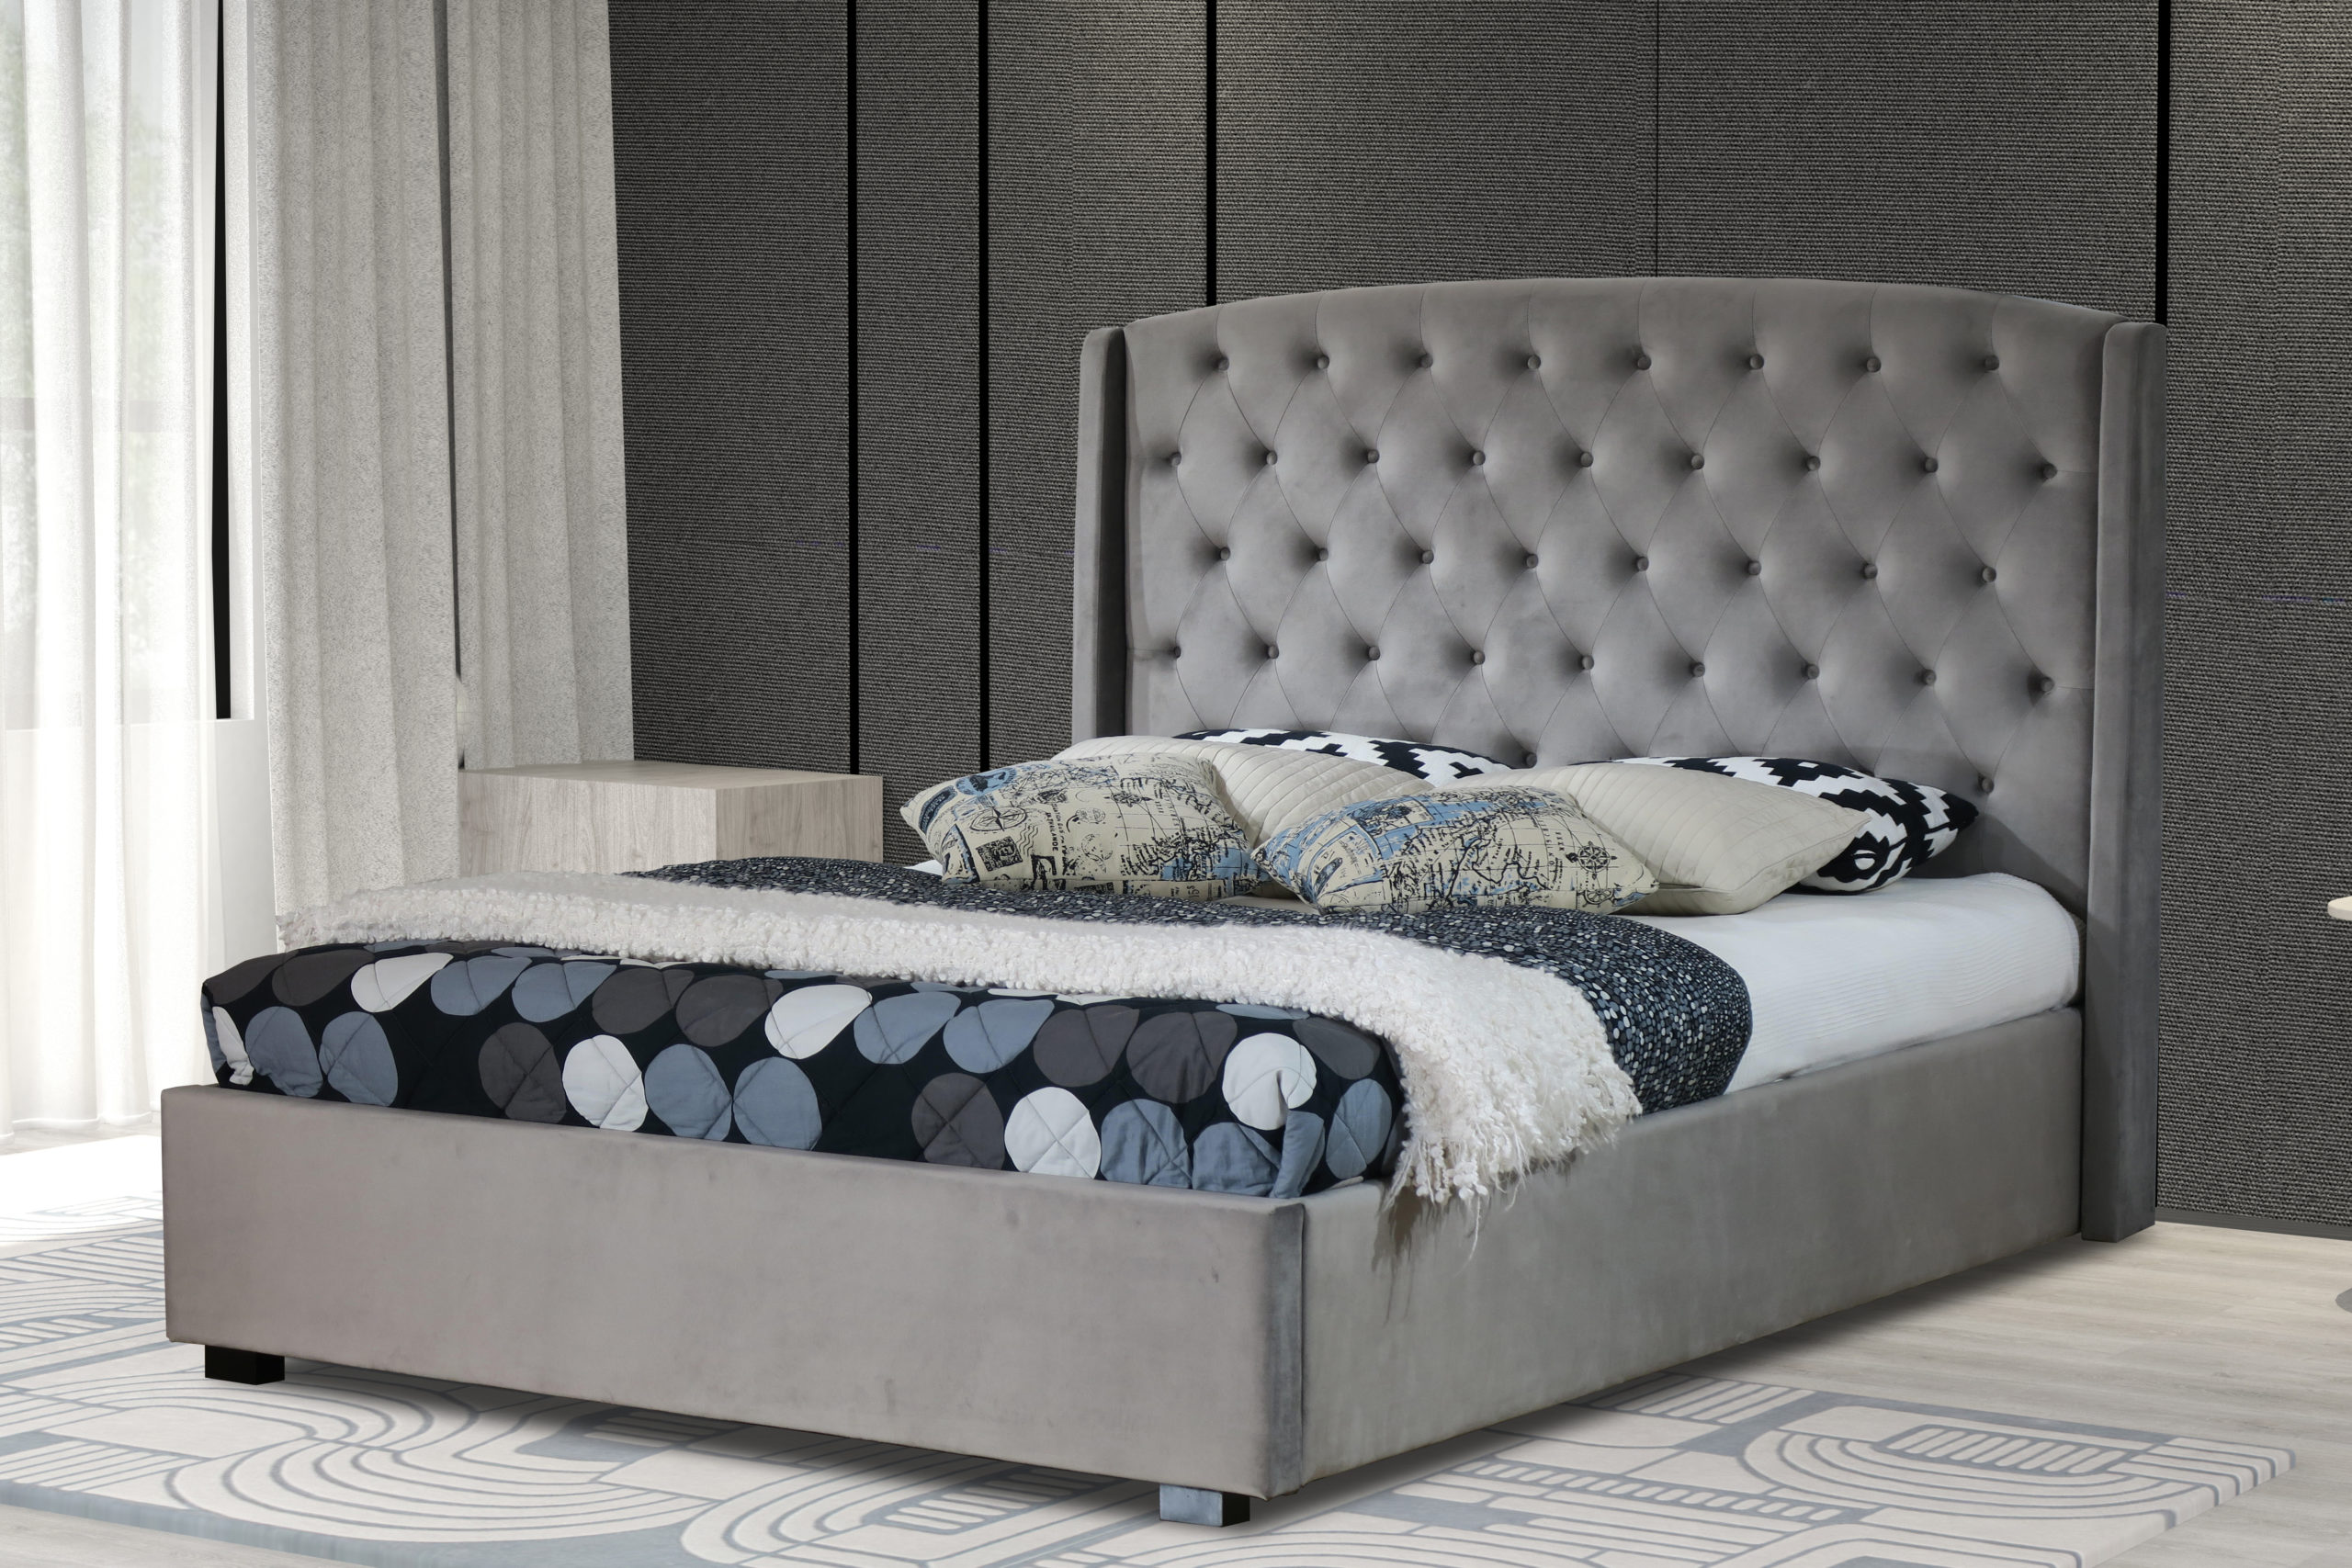 Grey Padded Headboard Double King Size, King Size Bed Frame With Upholstered Headboard